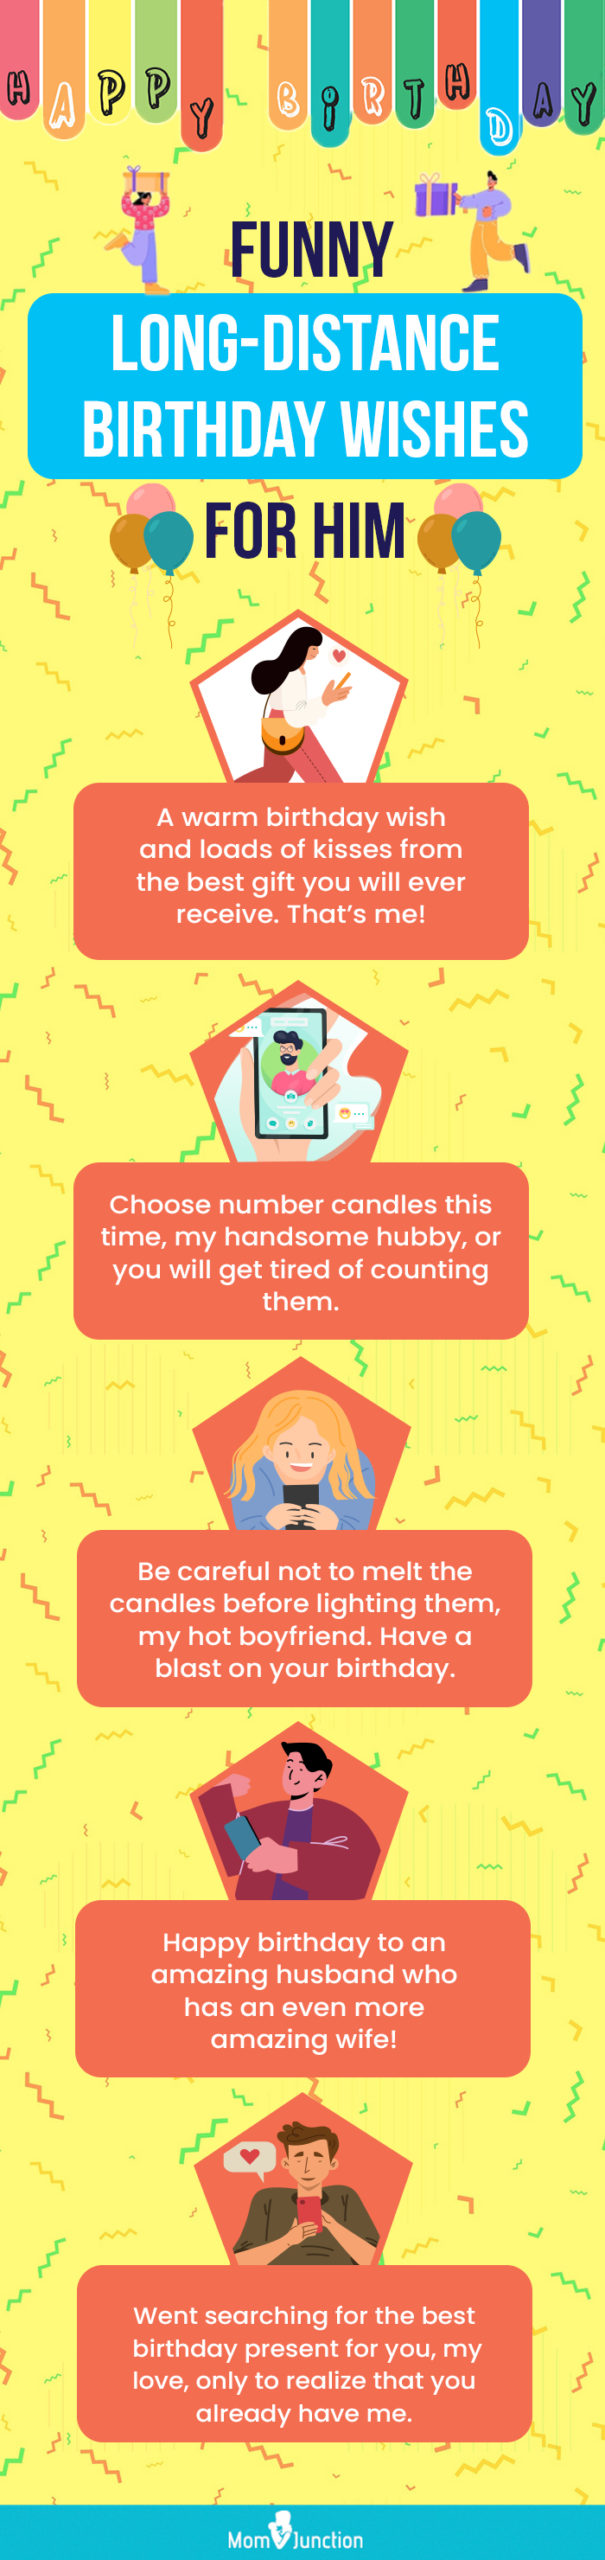 long distance wishes for his birthday (infographic)